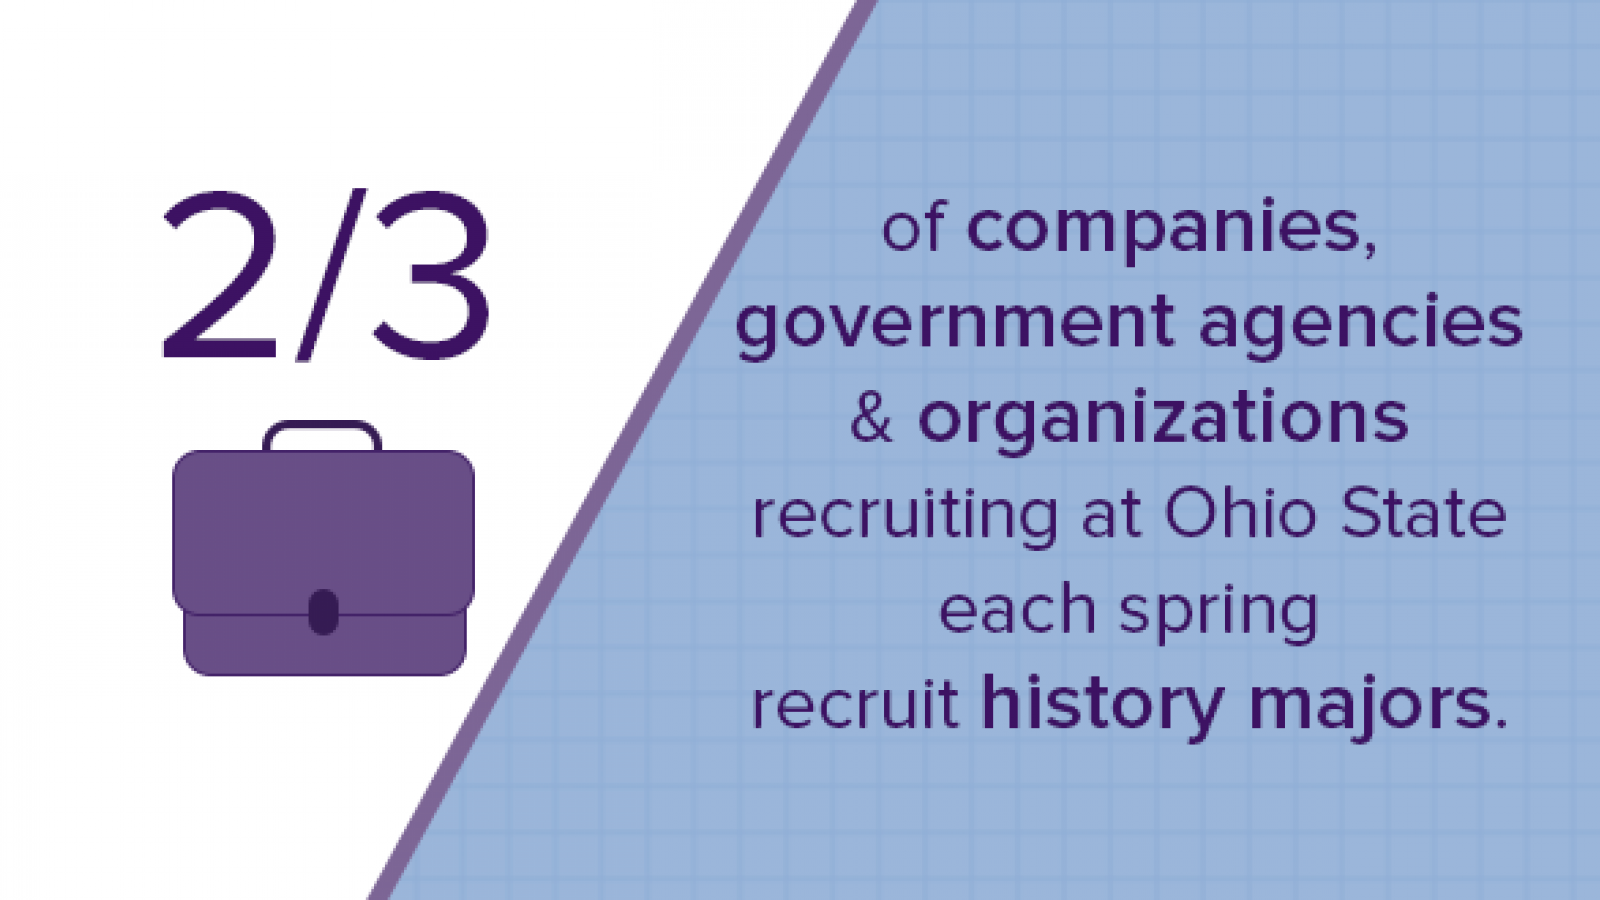 Two-thirds of companies, gov agencies and organizations recruiting at Ohio State each spring recruit history majors.